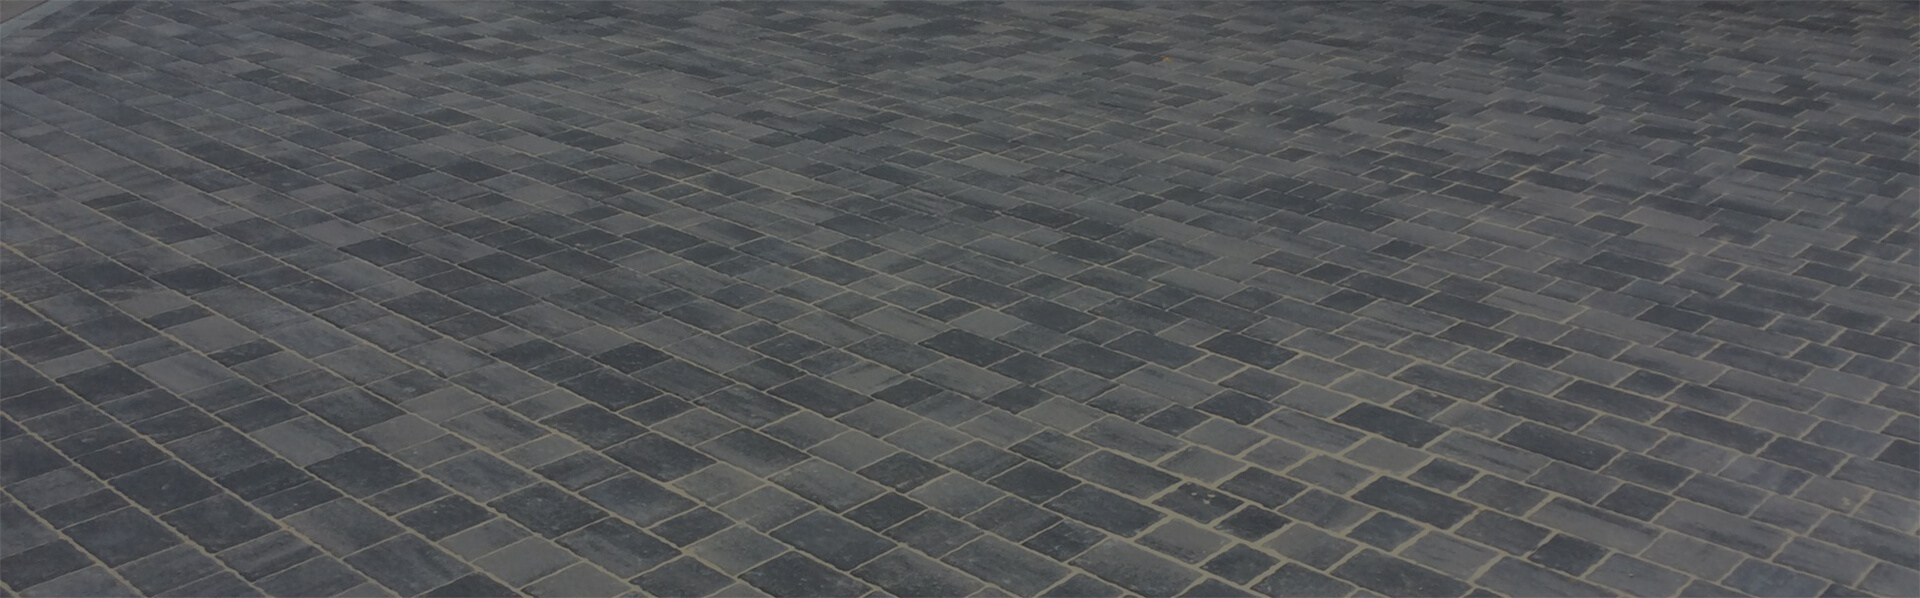 Block Paving Suppliers